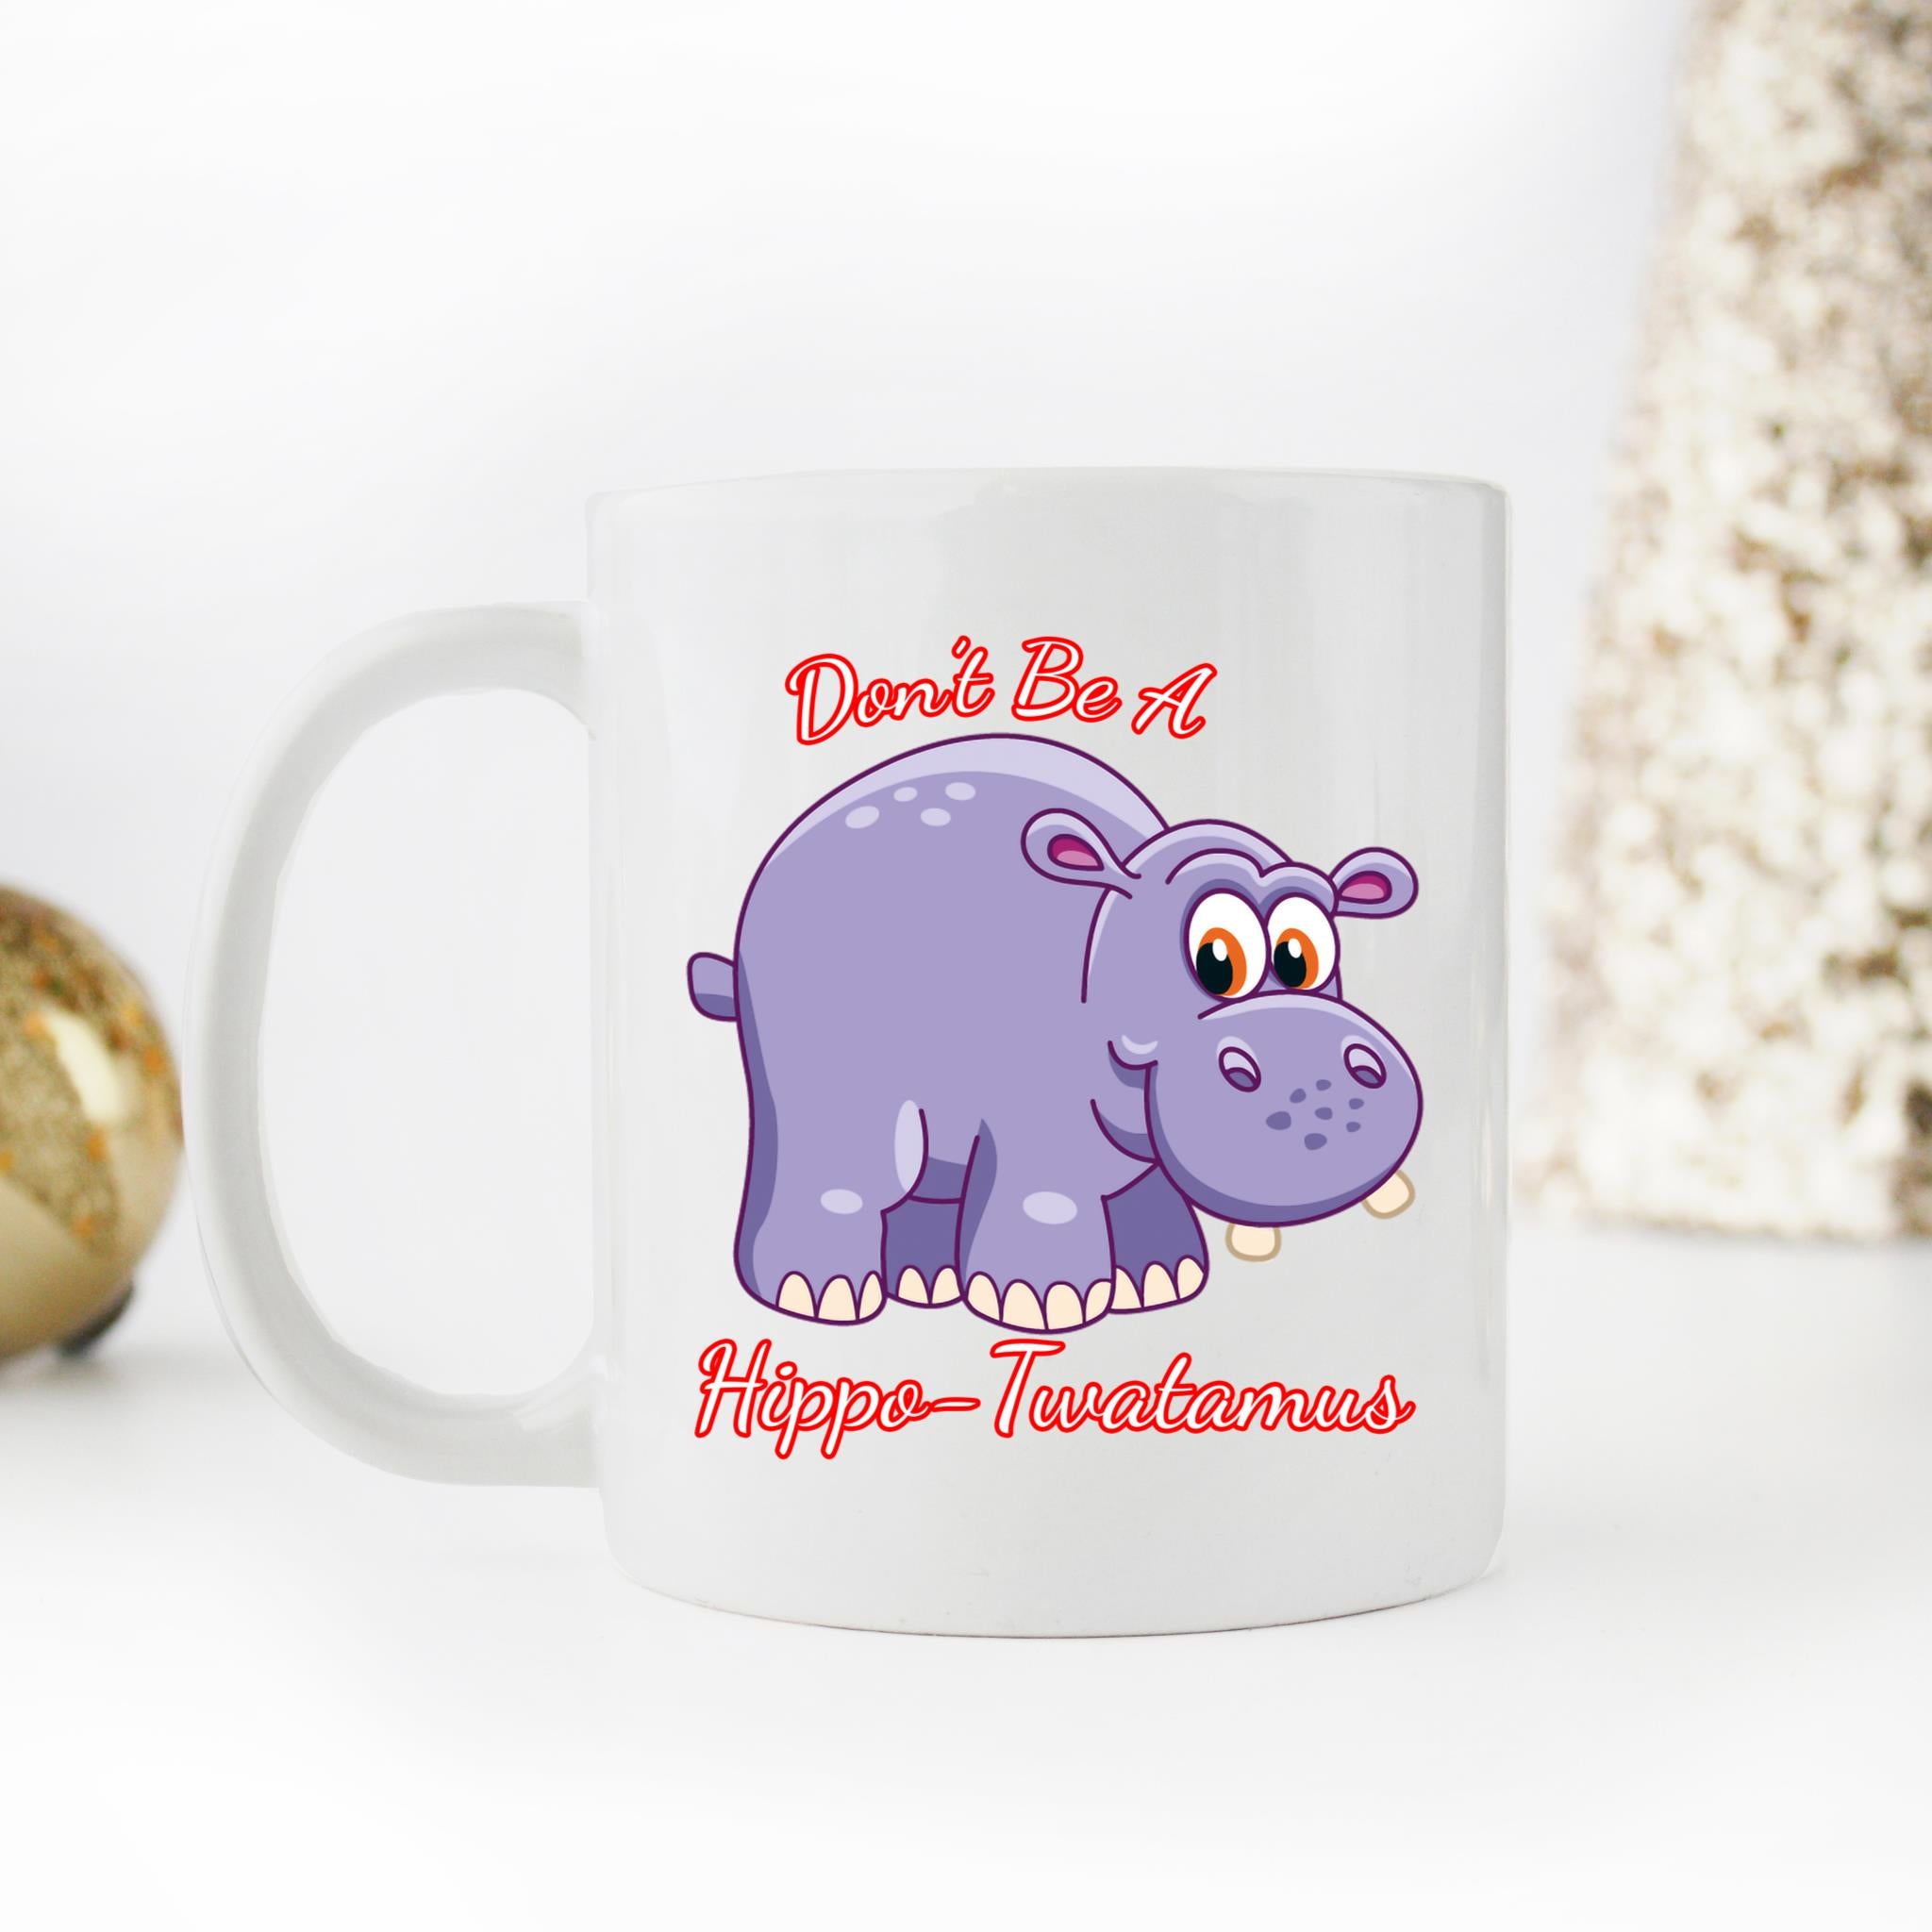 Skitongifts Funny Ceramic Coffee Mug For Birthday, Mother's Day, Father's Day, Christmas LH211221_Don't Be A Hippo 5Wt2T9C